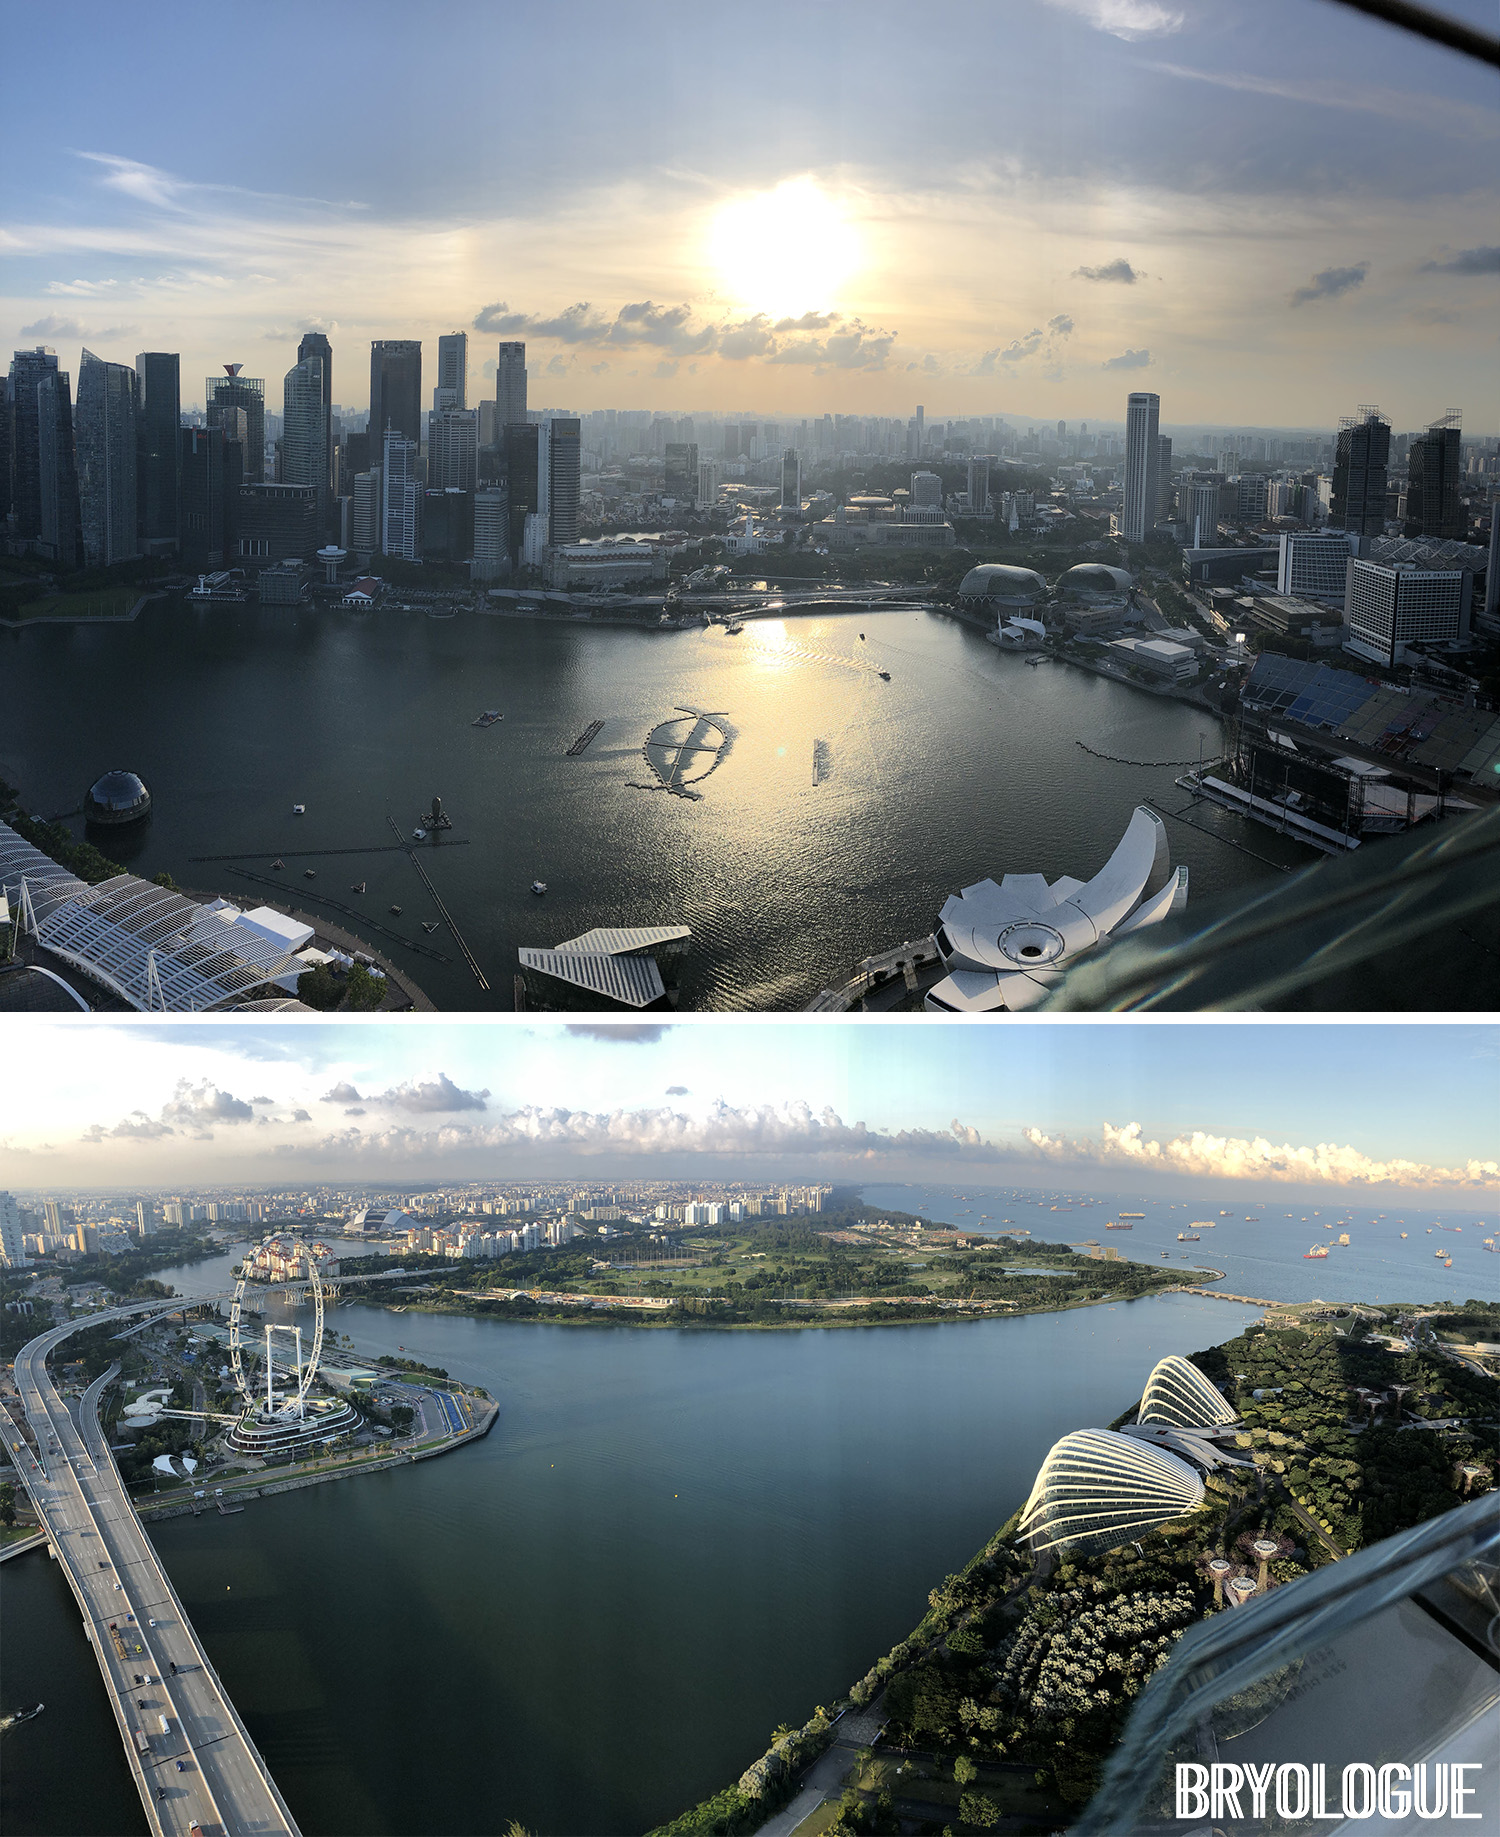 Singapore viewed from the Marina Bays Sands SkyPark Observation Deck